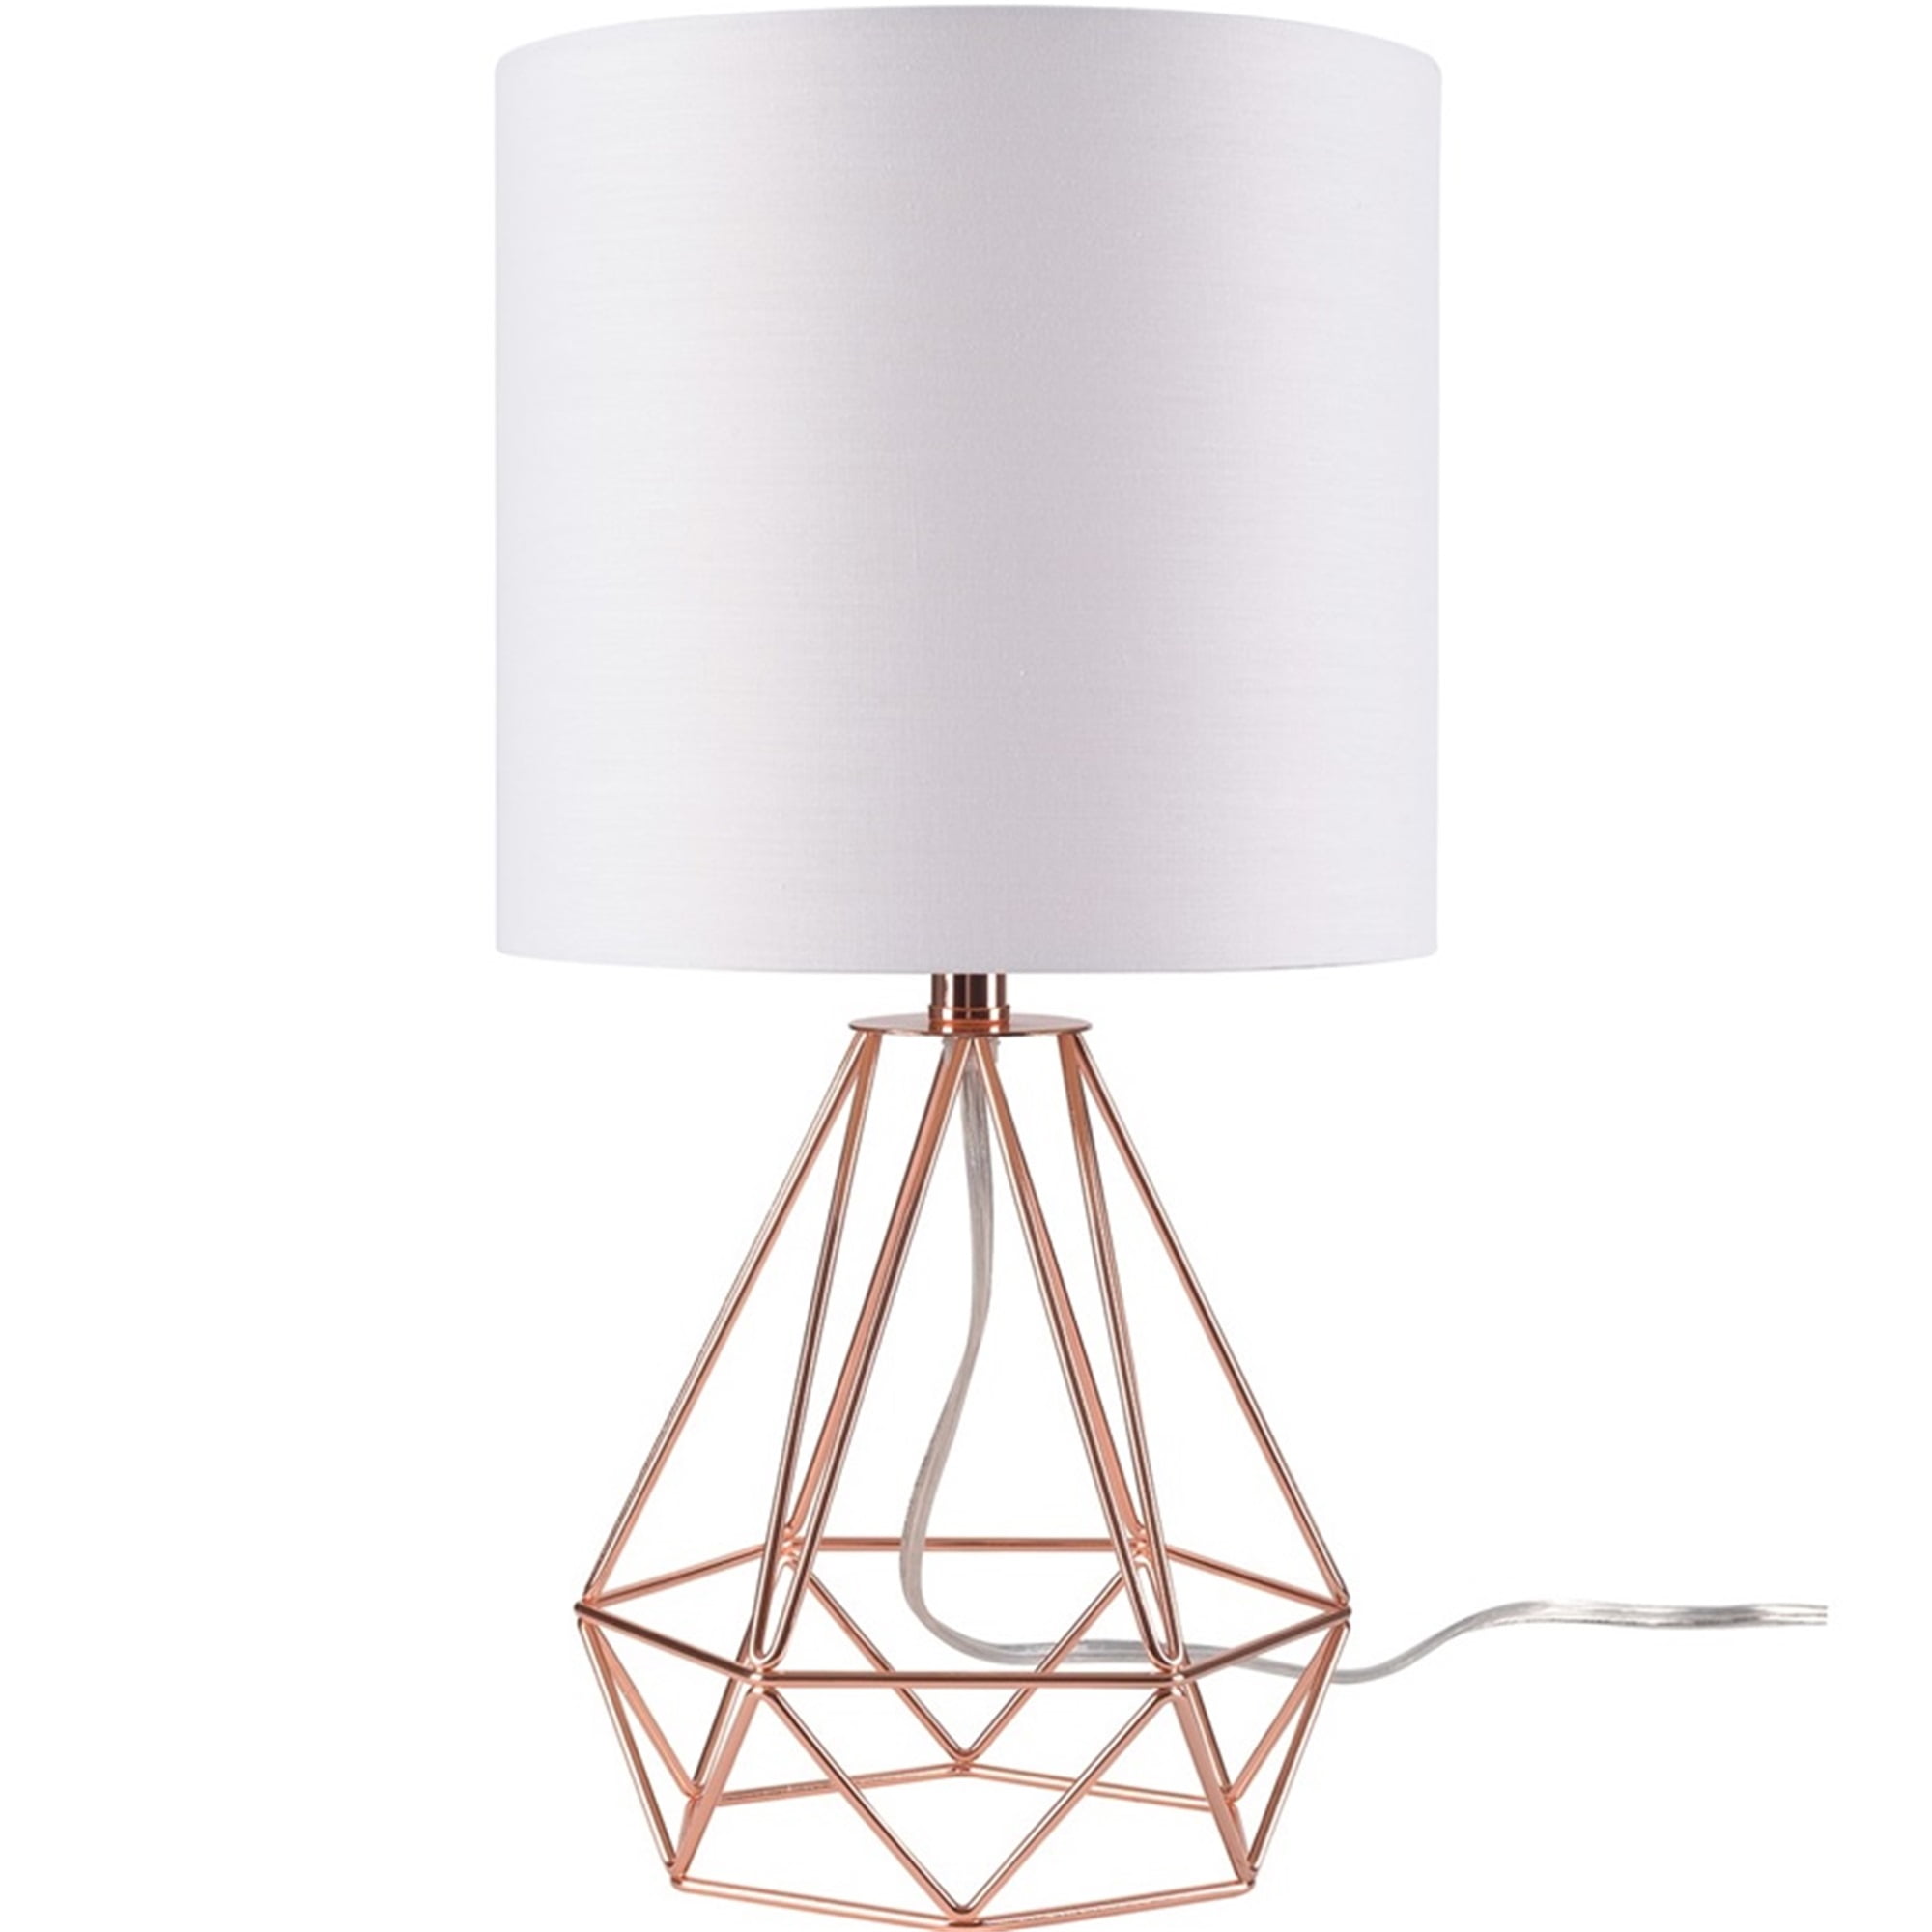 Copper Finish Metal Desk Lamp, Angus Copper Geometric Base Table Lamp With White Shade